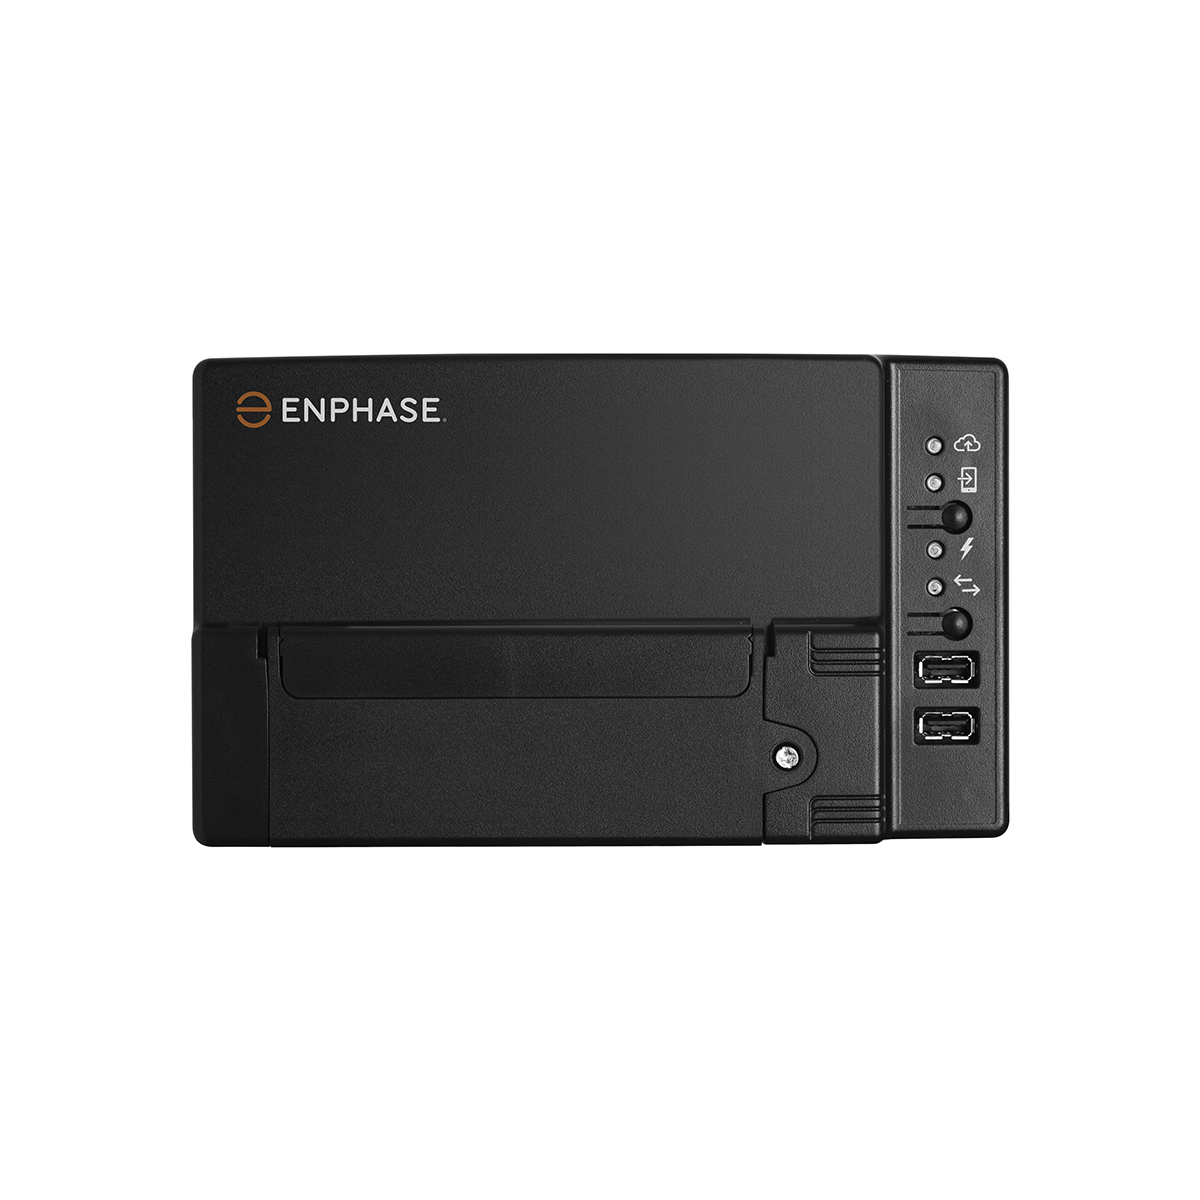 25x Sunpower P6 10125 wp met Enphase IQ8A en Accu 1x N Charge 10T,1 x N Charge 3T